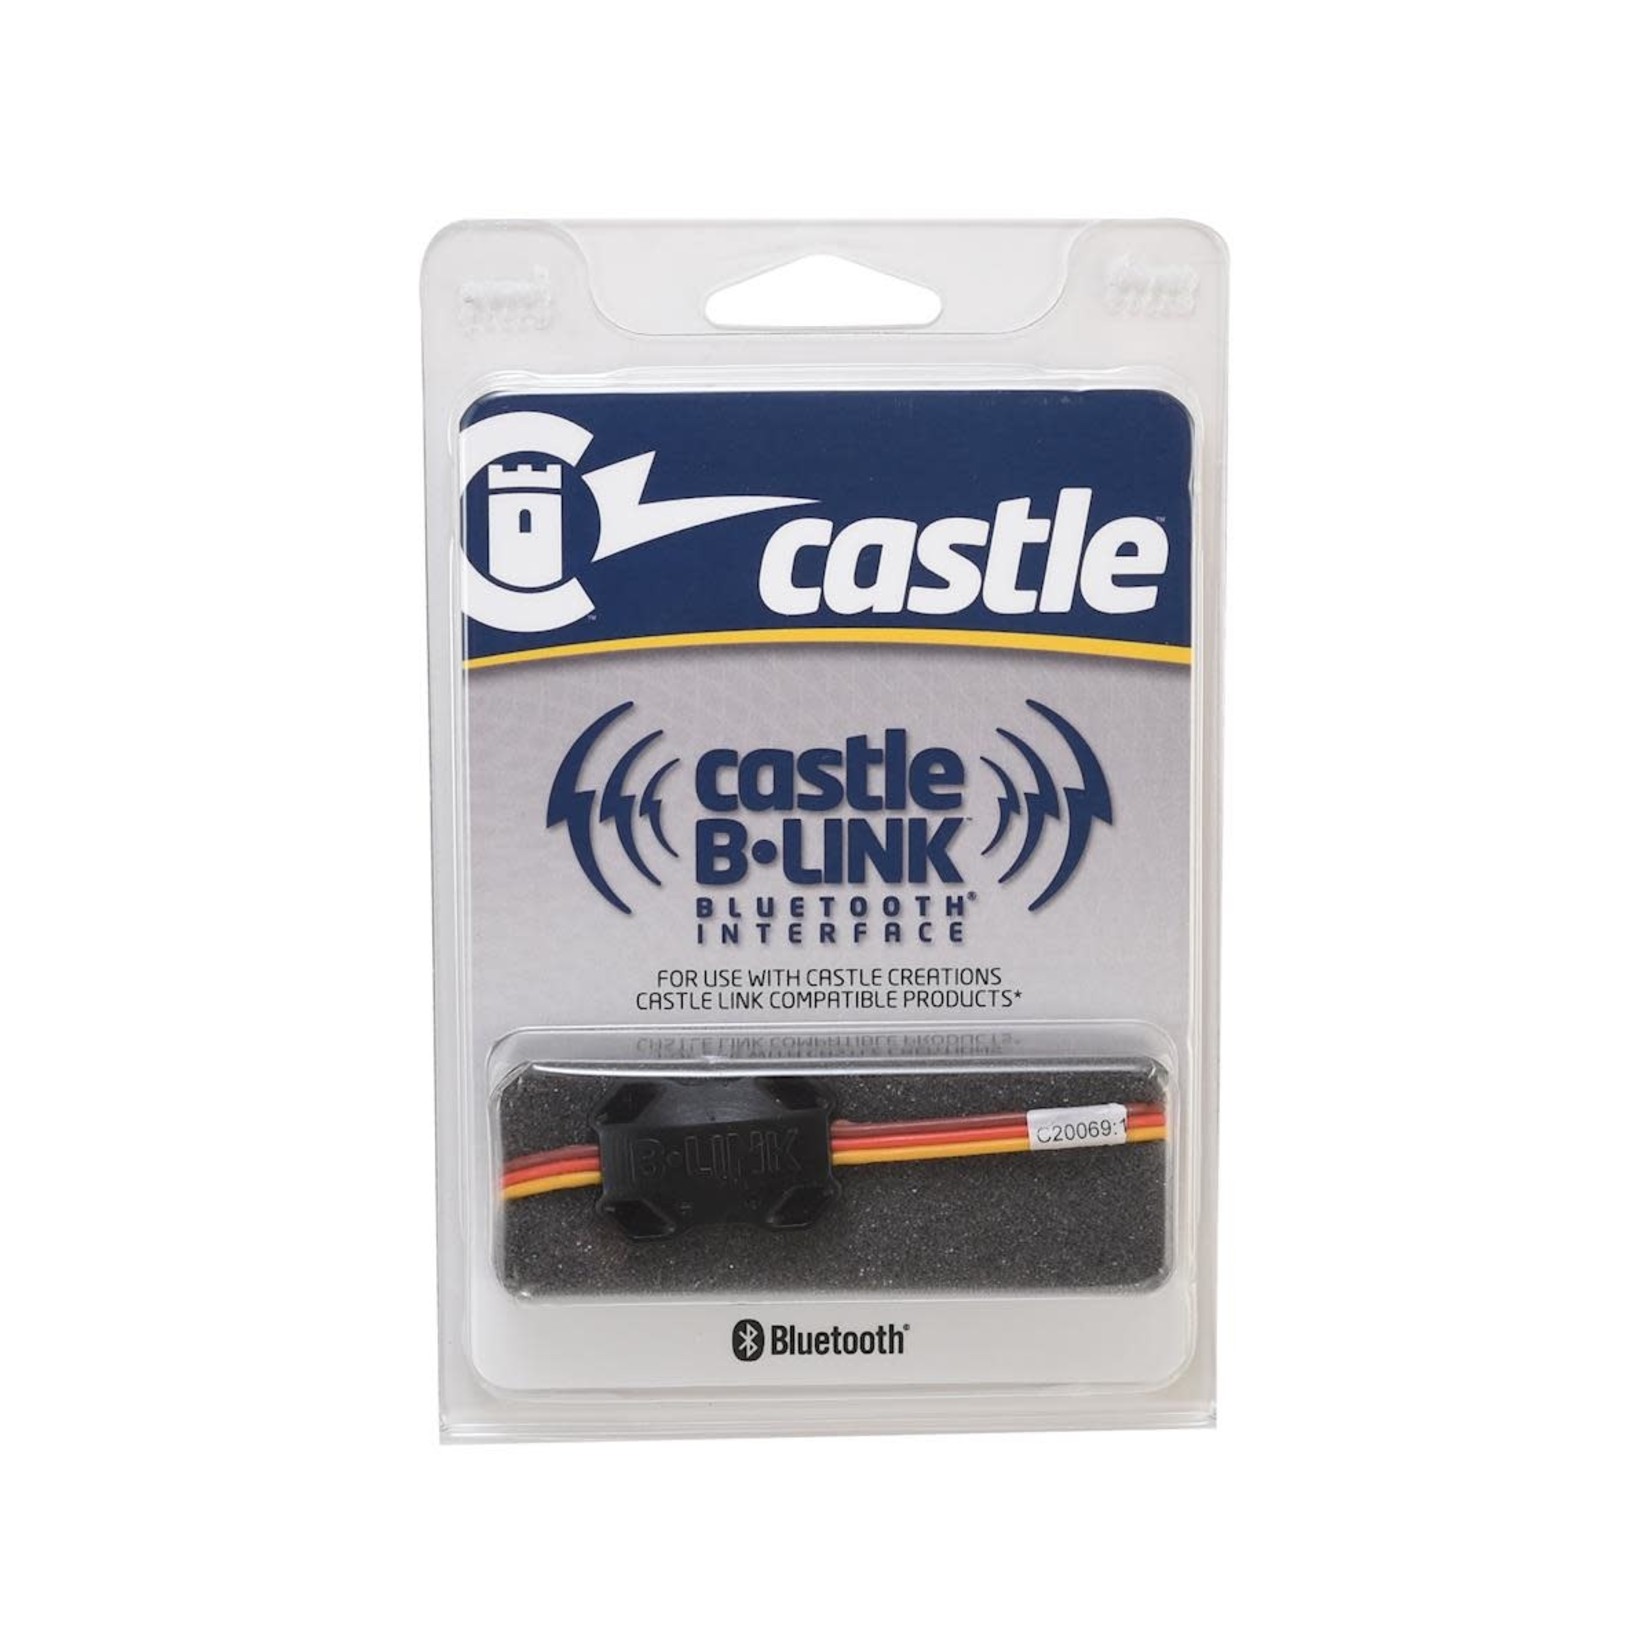 Castle Creations Castle Creations B Link Bluetooth Adapter #011-0135-00